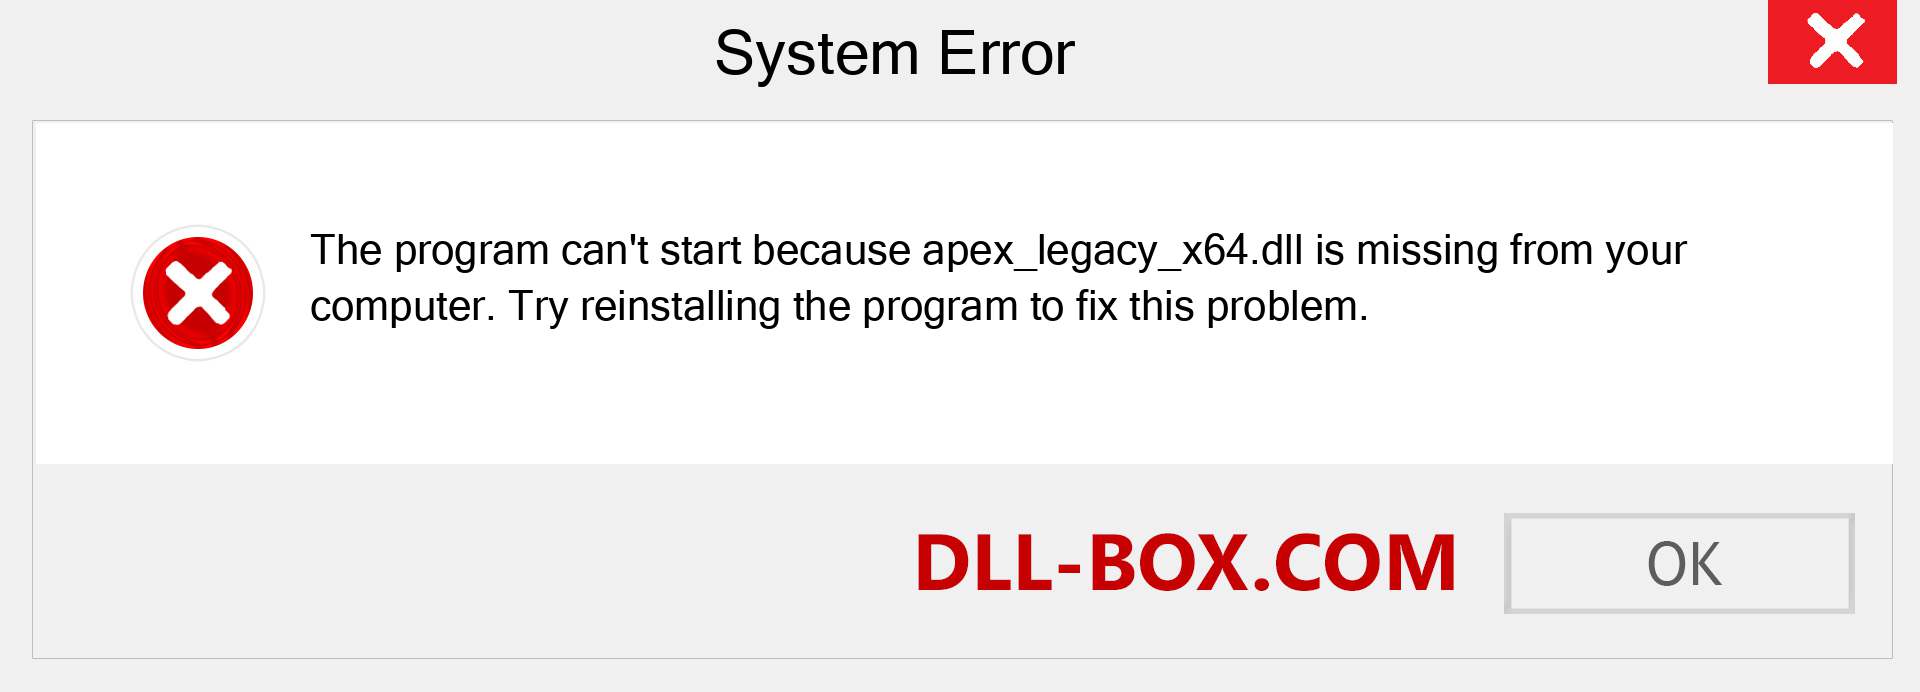  apex_legacy_x64.dll file is missing?. Download for Windows 7, 8, 10 - Fix  apex_legacy_x64 dll Missing Error on Windows, photos, images